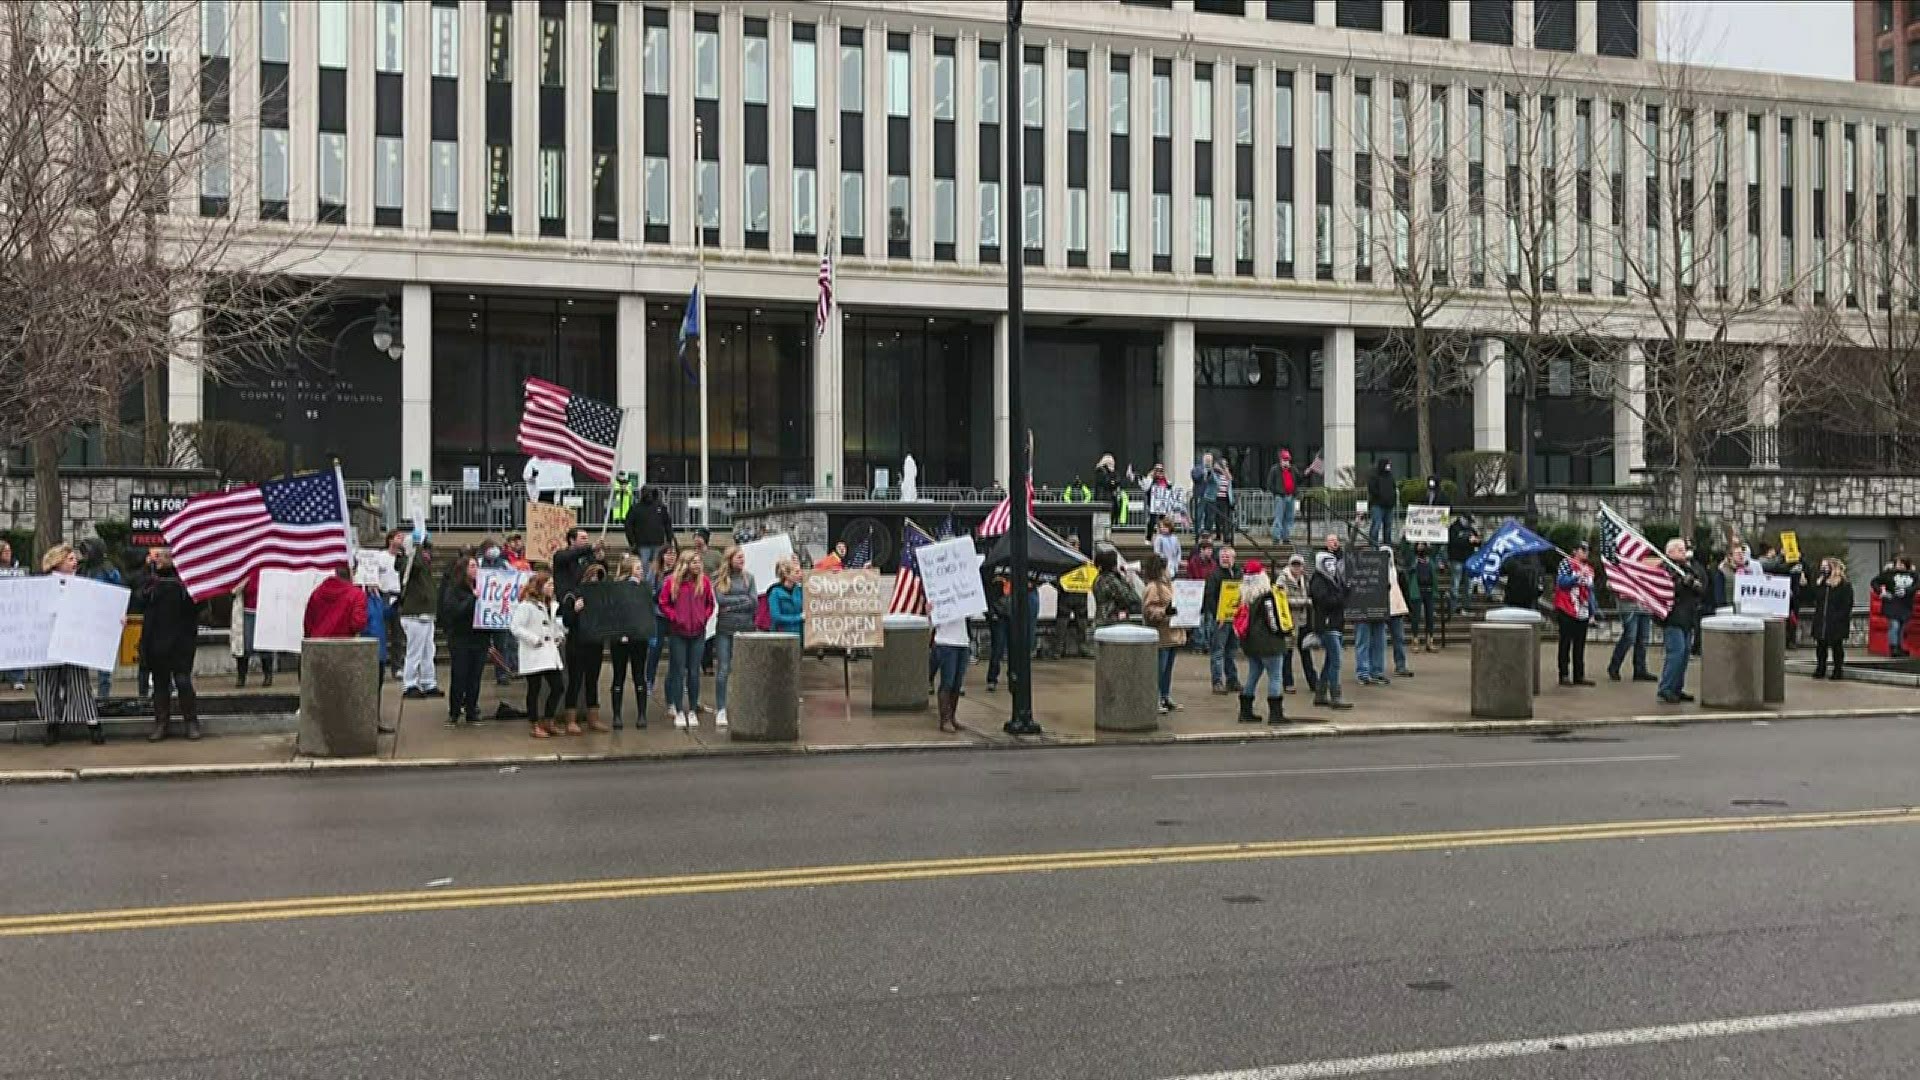 The governor was asked this morning about protests that we've seen in some places across the state, like this one outside the Rath Building in Buffalo yesterday.